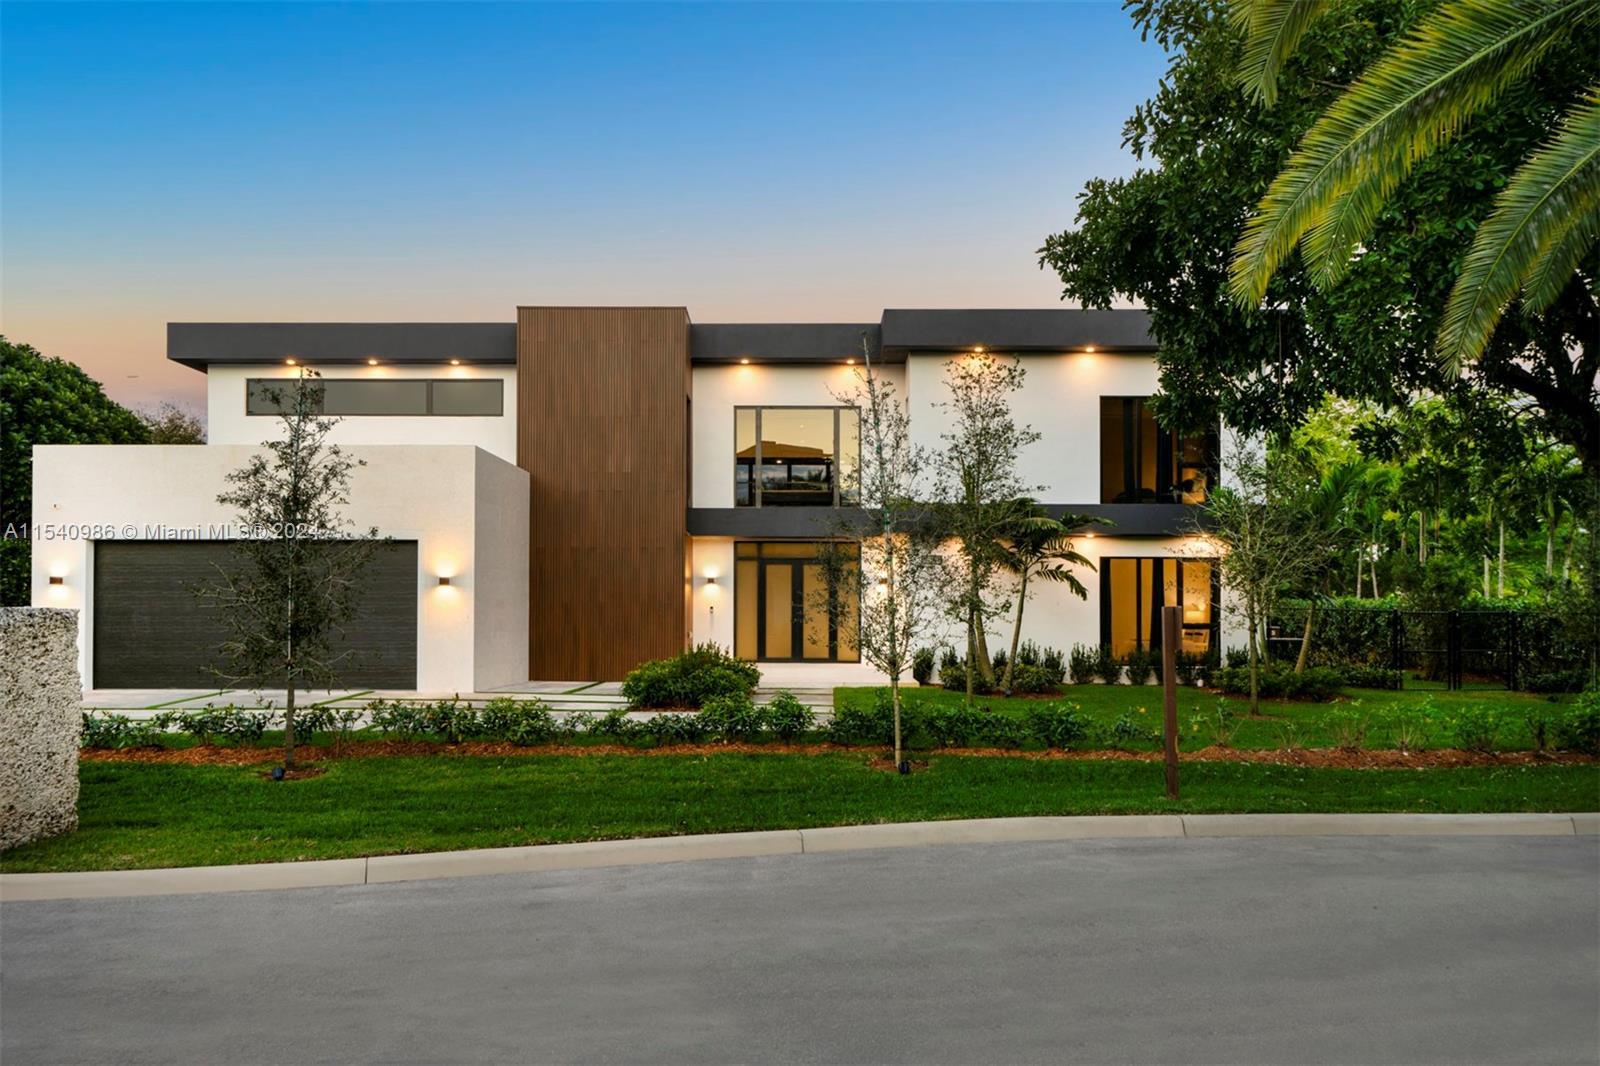 In a tranquil cul-de-sac, this new contemporary corner home offers an airy, open layout with high ce